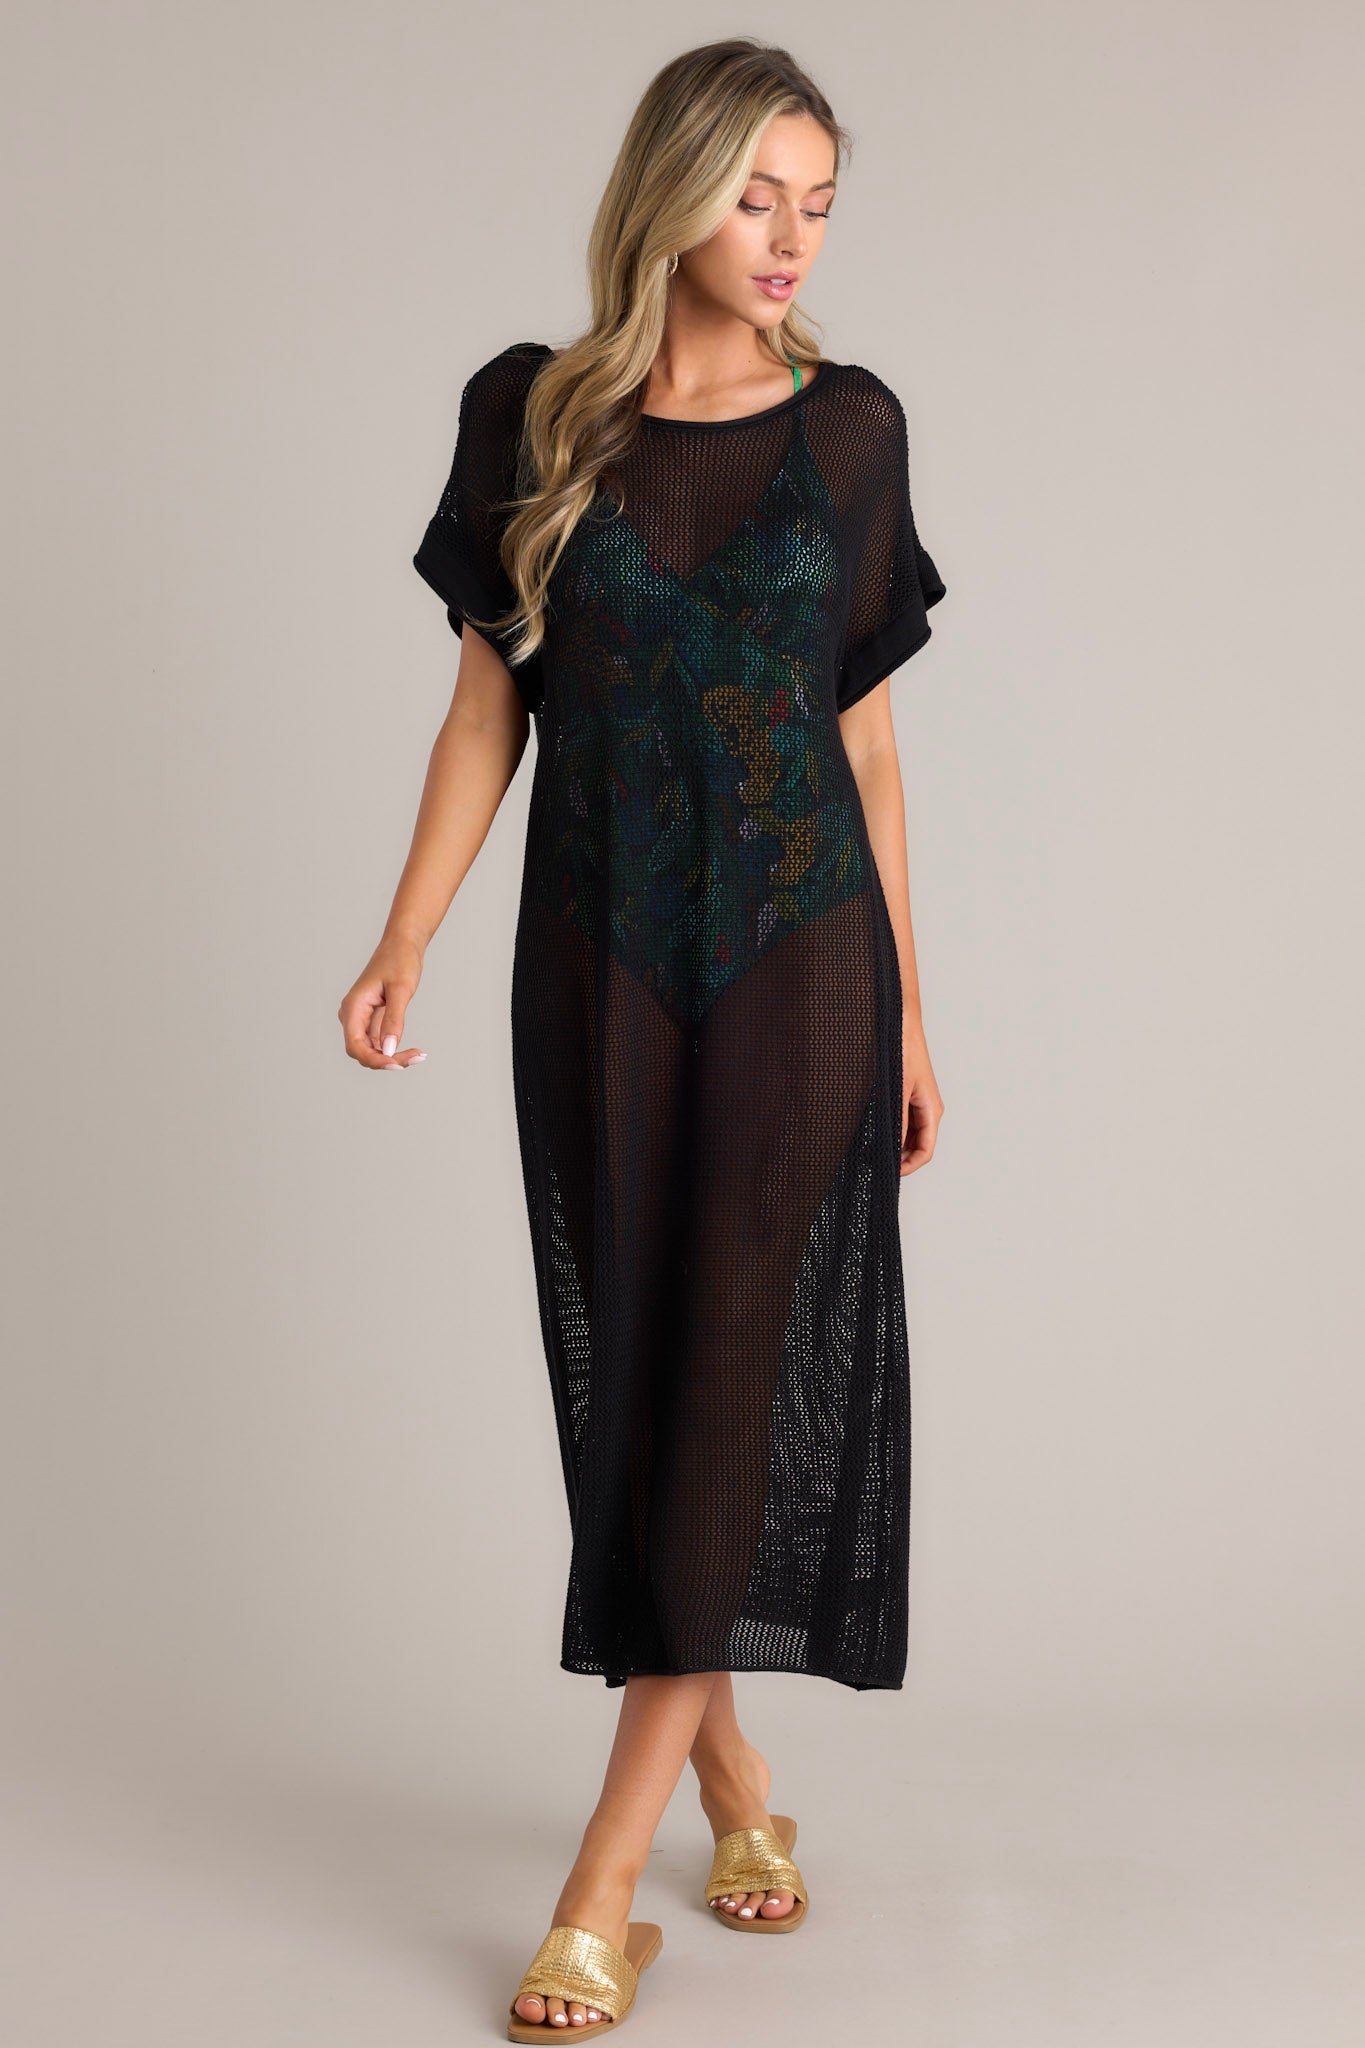 Angled full body view of this black cover-up dress that features a wide rounded neckline, open back feature, an open-knit design, and cuffed short sleeves.